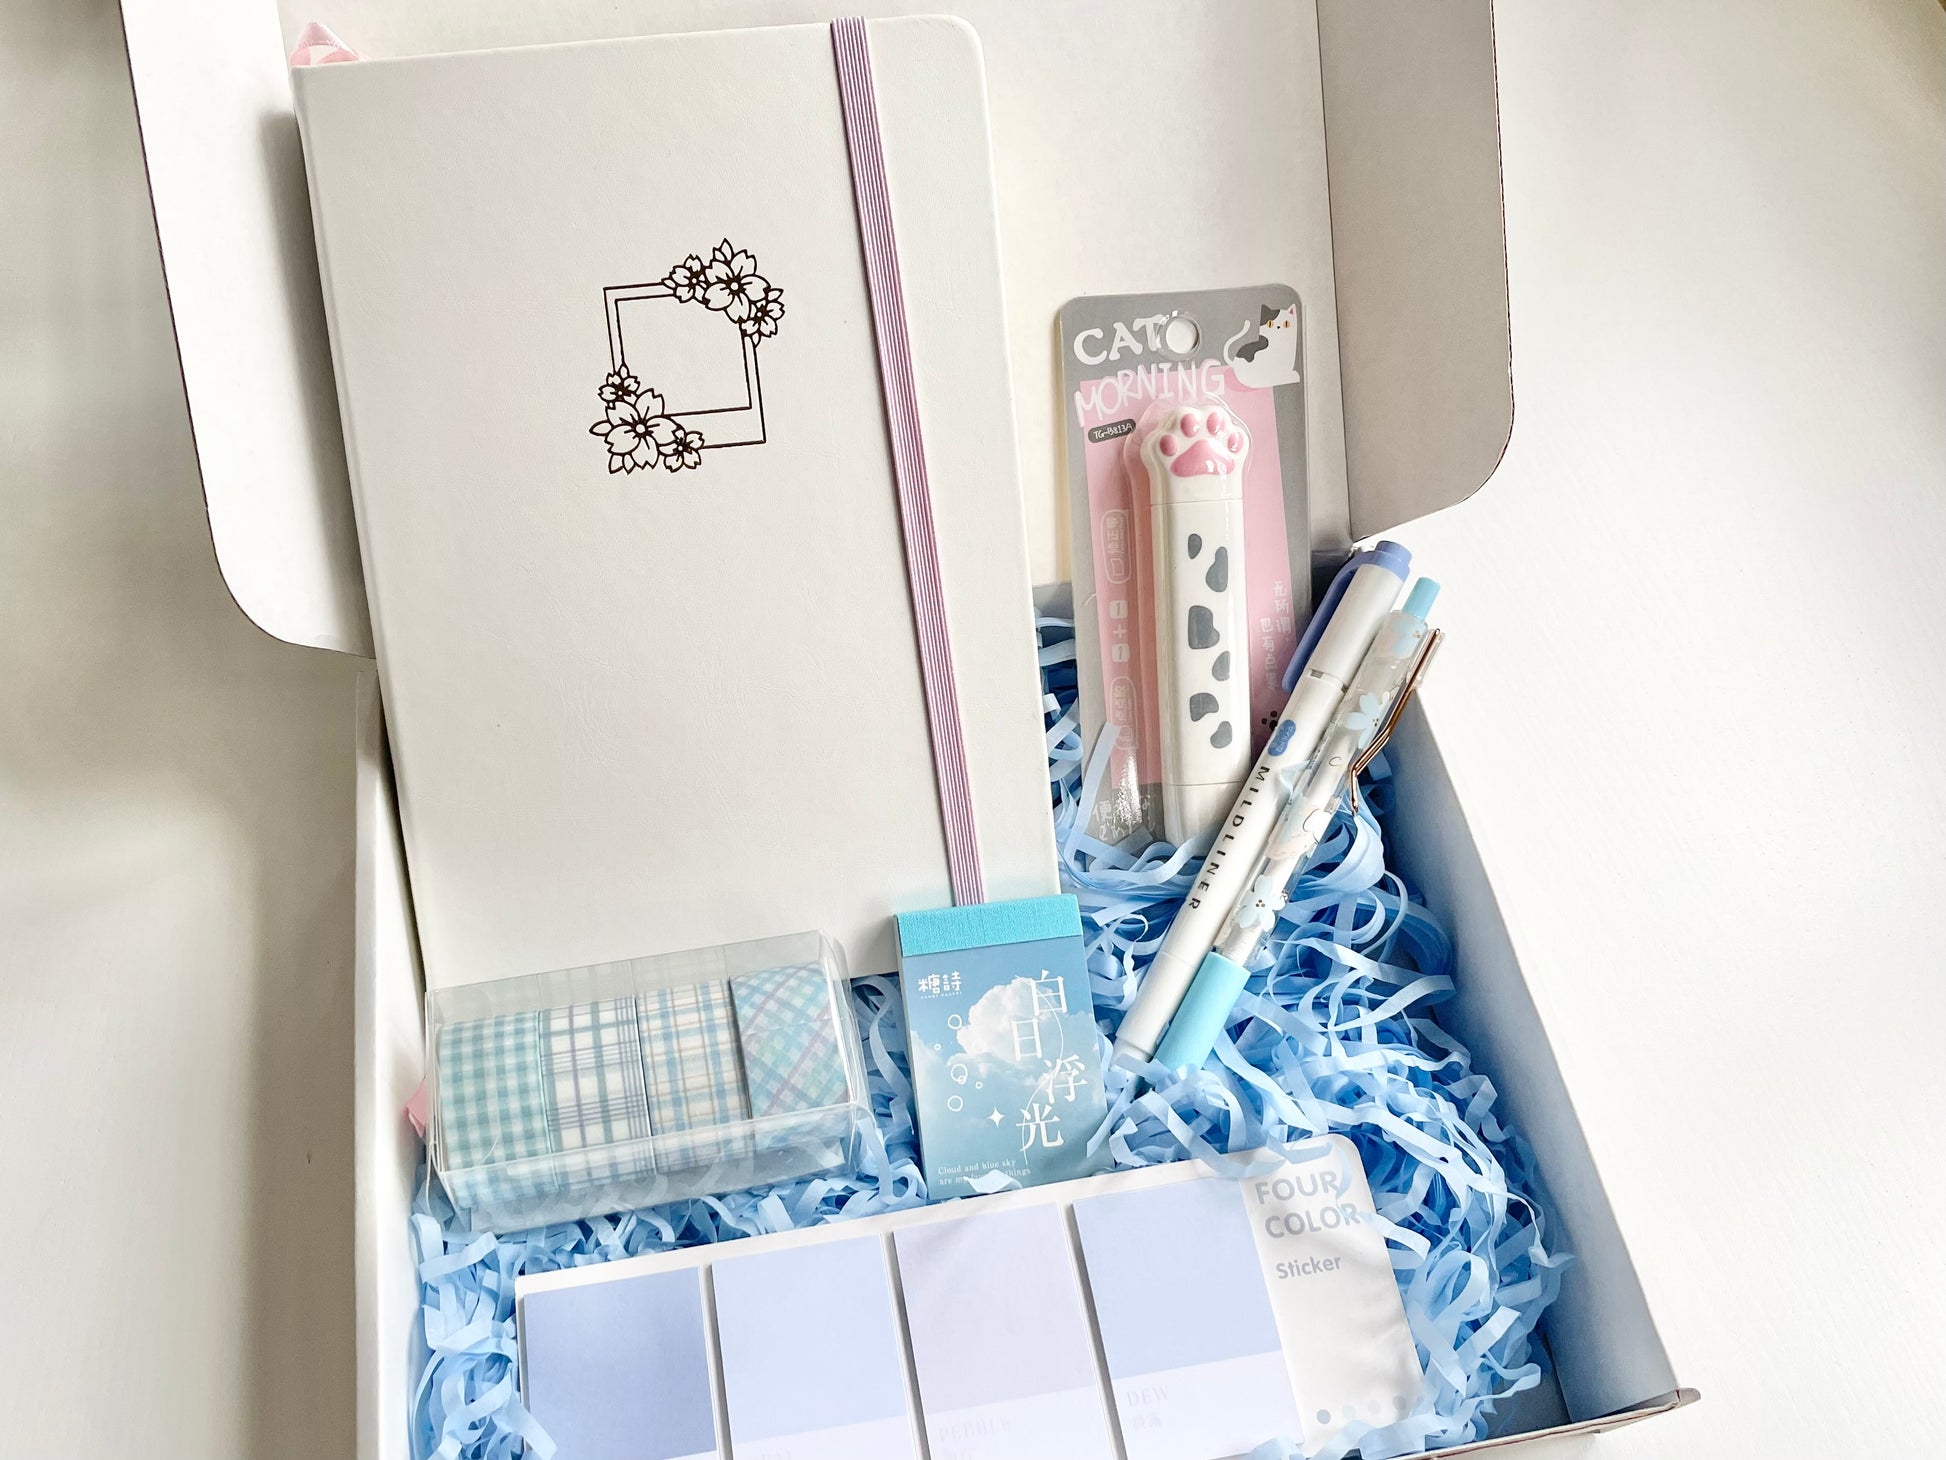 B'Nottee Bullet Journaling Kit – Packaging Of The World